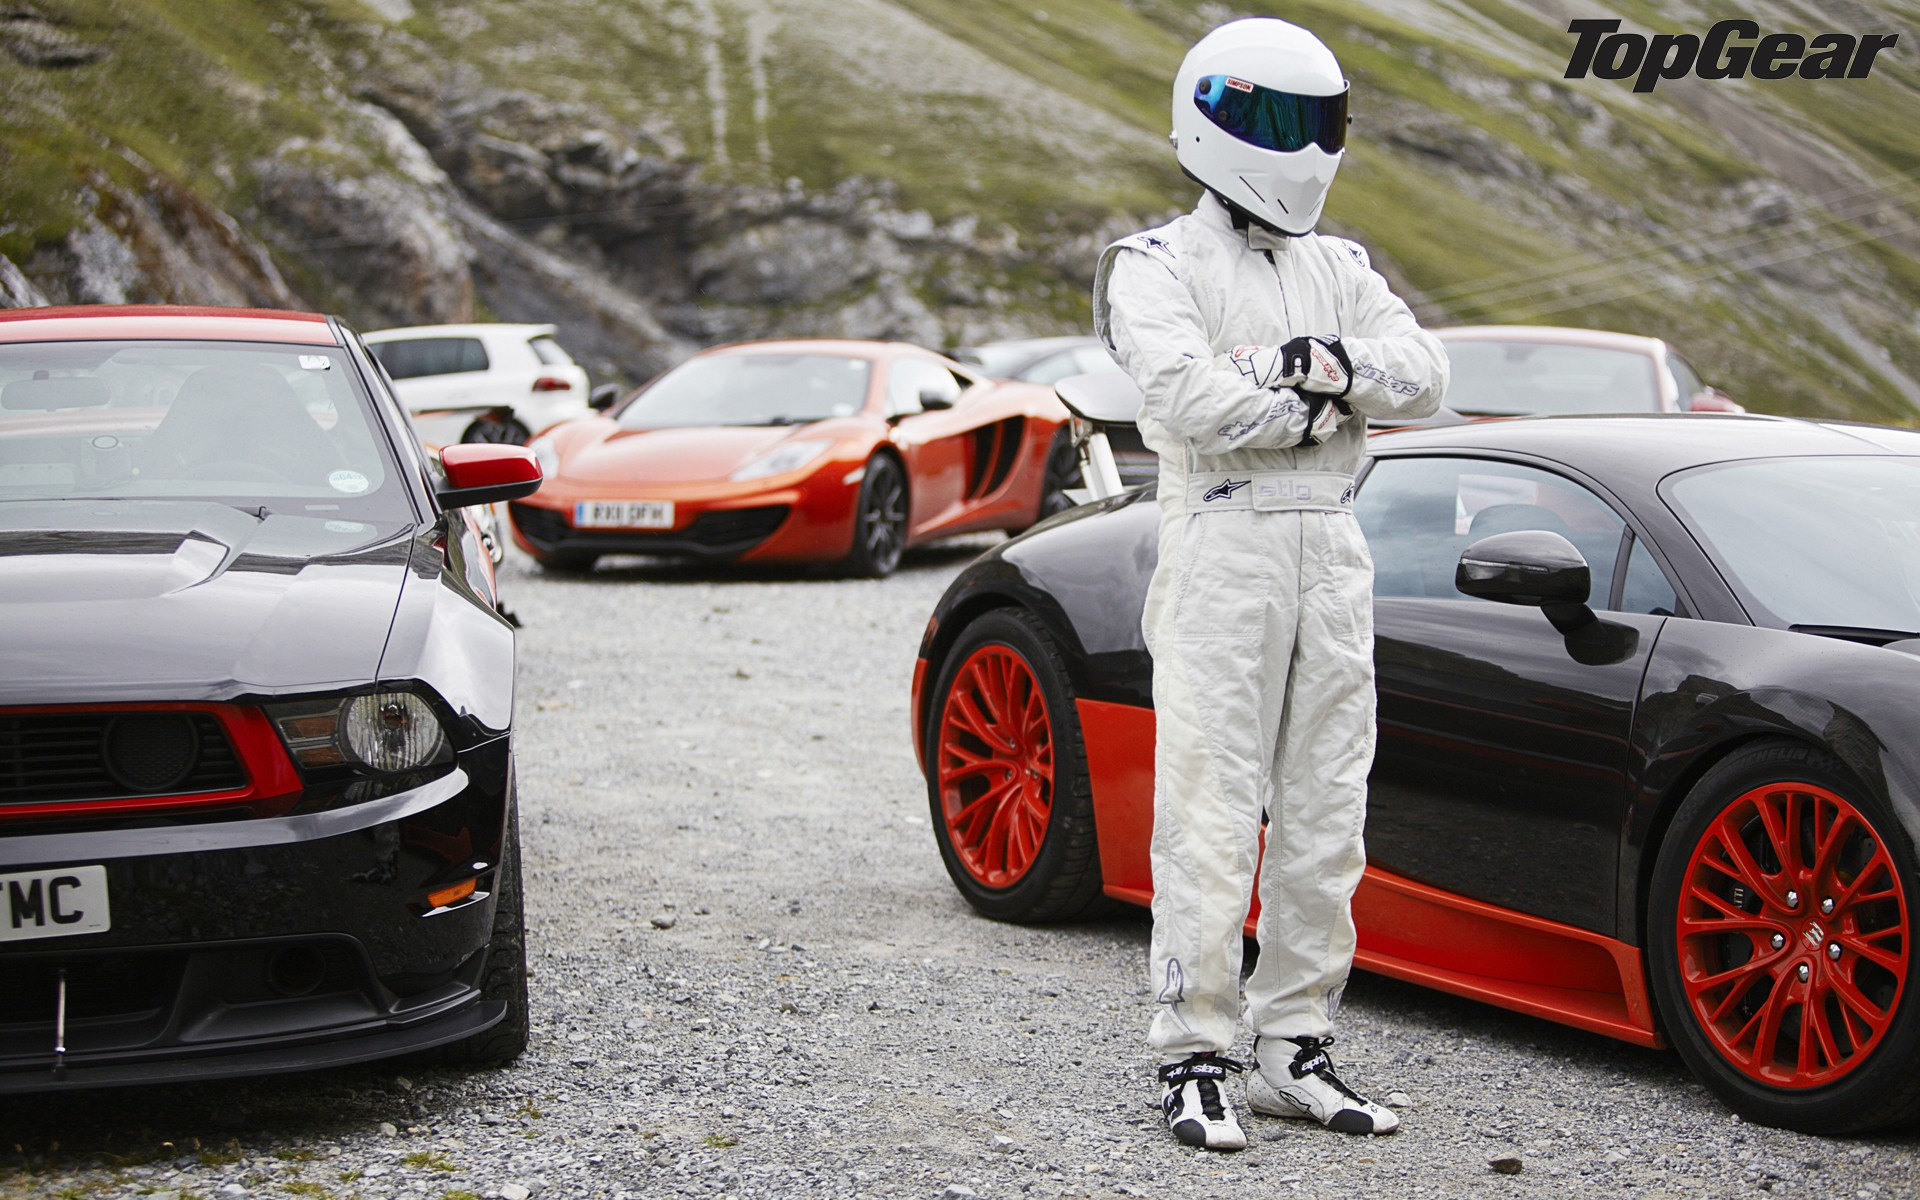 1920x1200 140+ Top Gear HD Wallpapers and Backgrounds